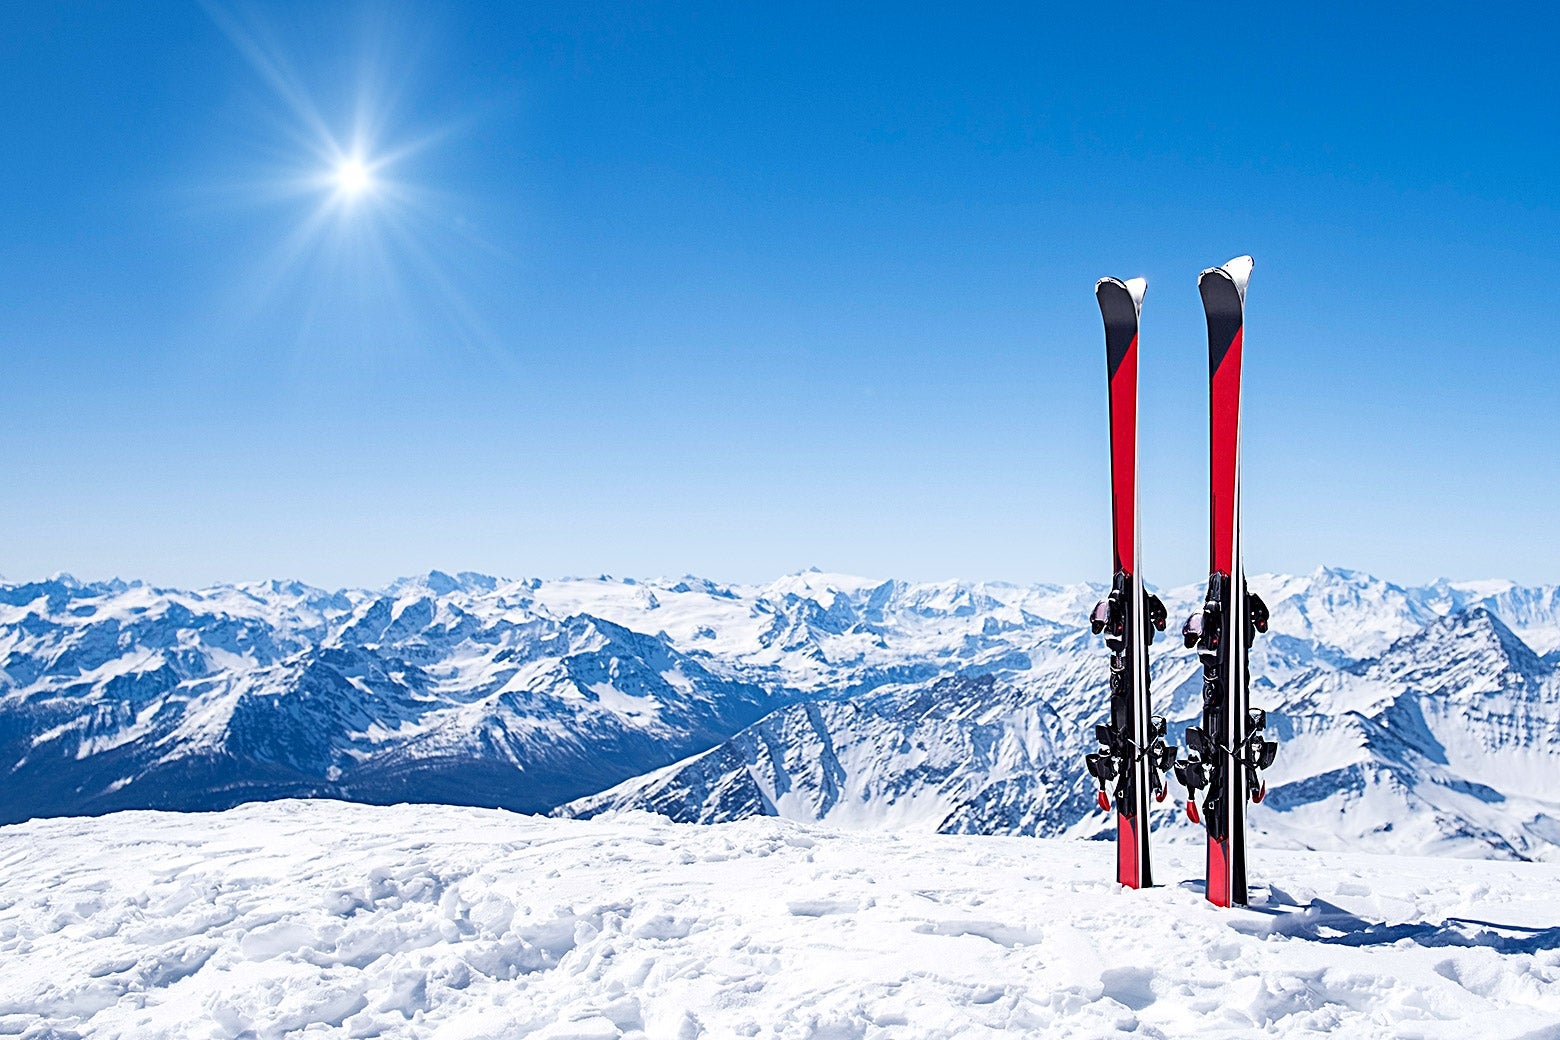 Two pairs of skis are seen standing upright near the edge of a snowy hill.